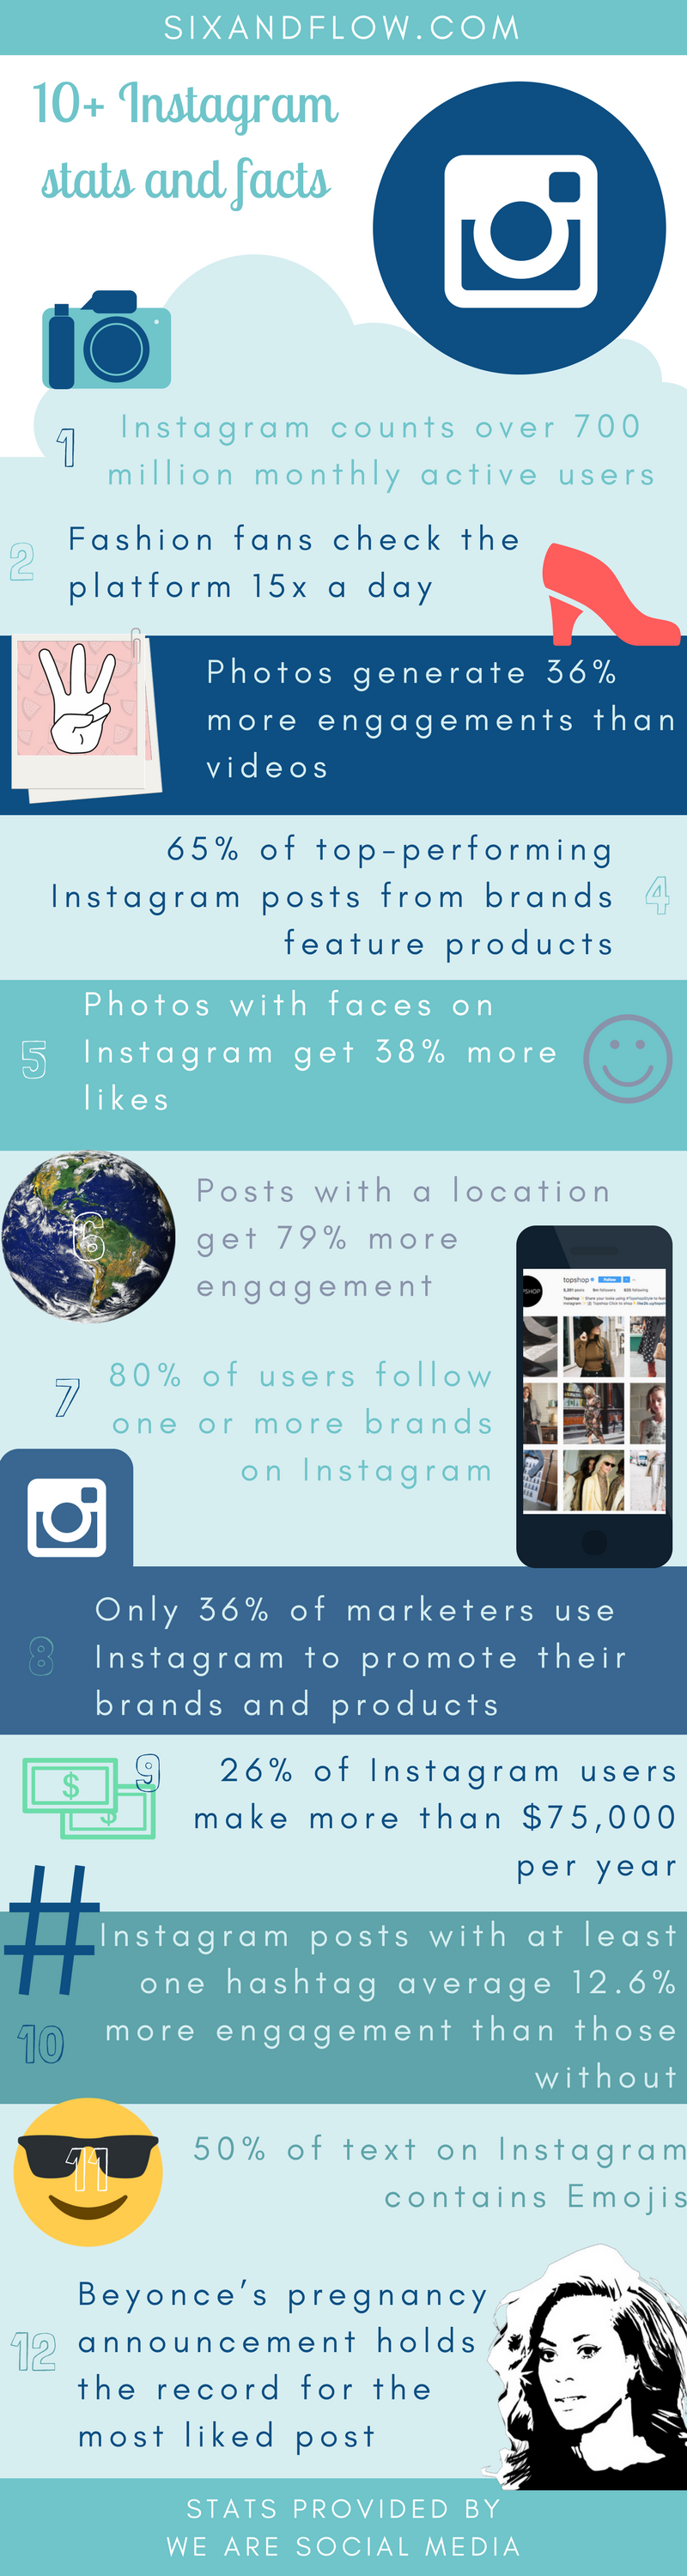 10+ Instagram stats and facts.png